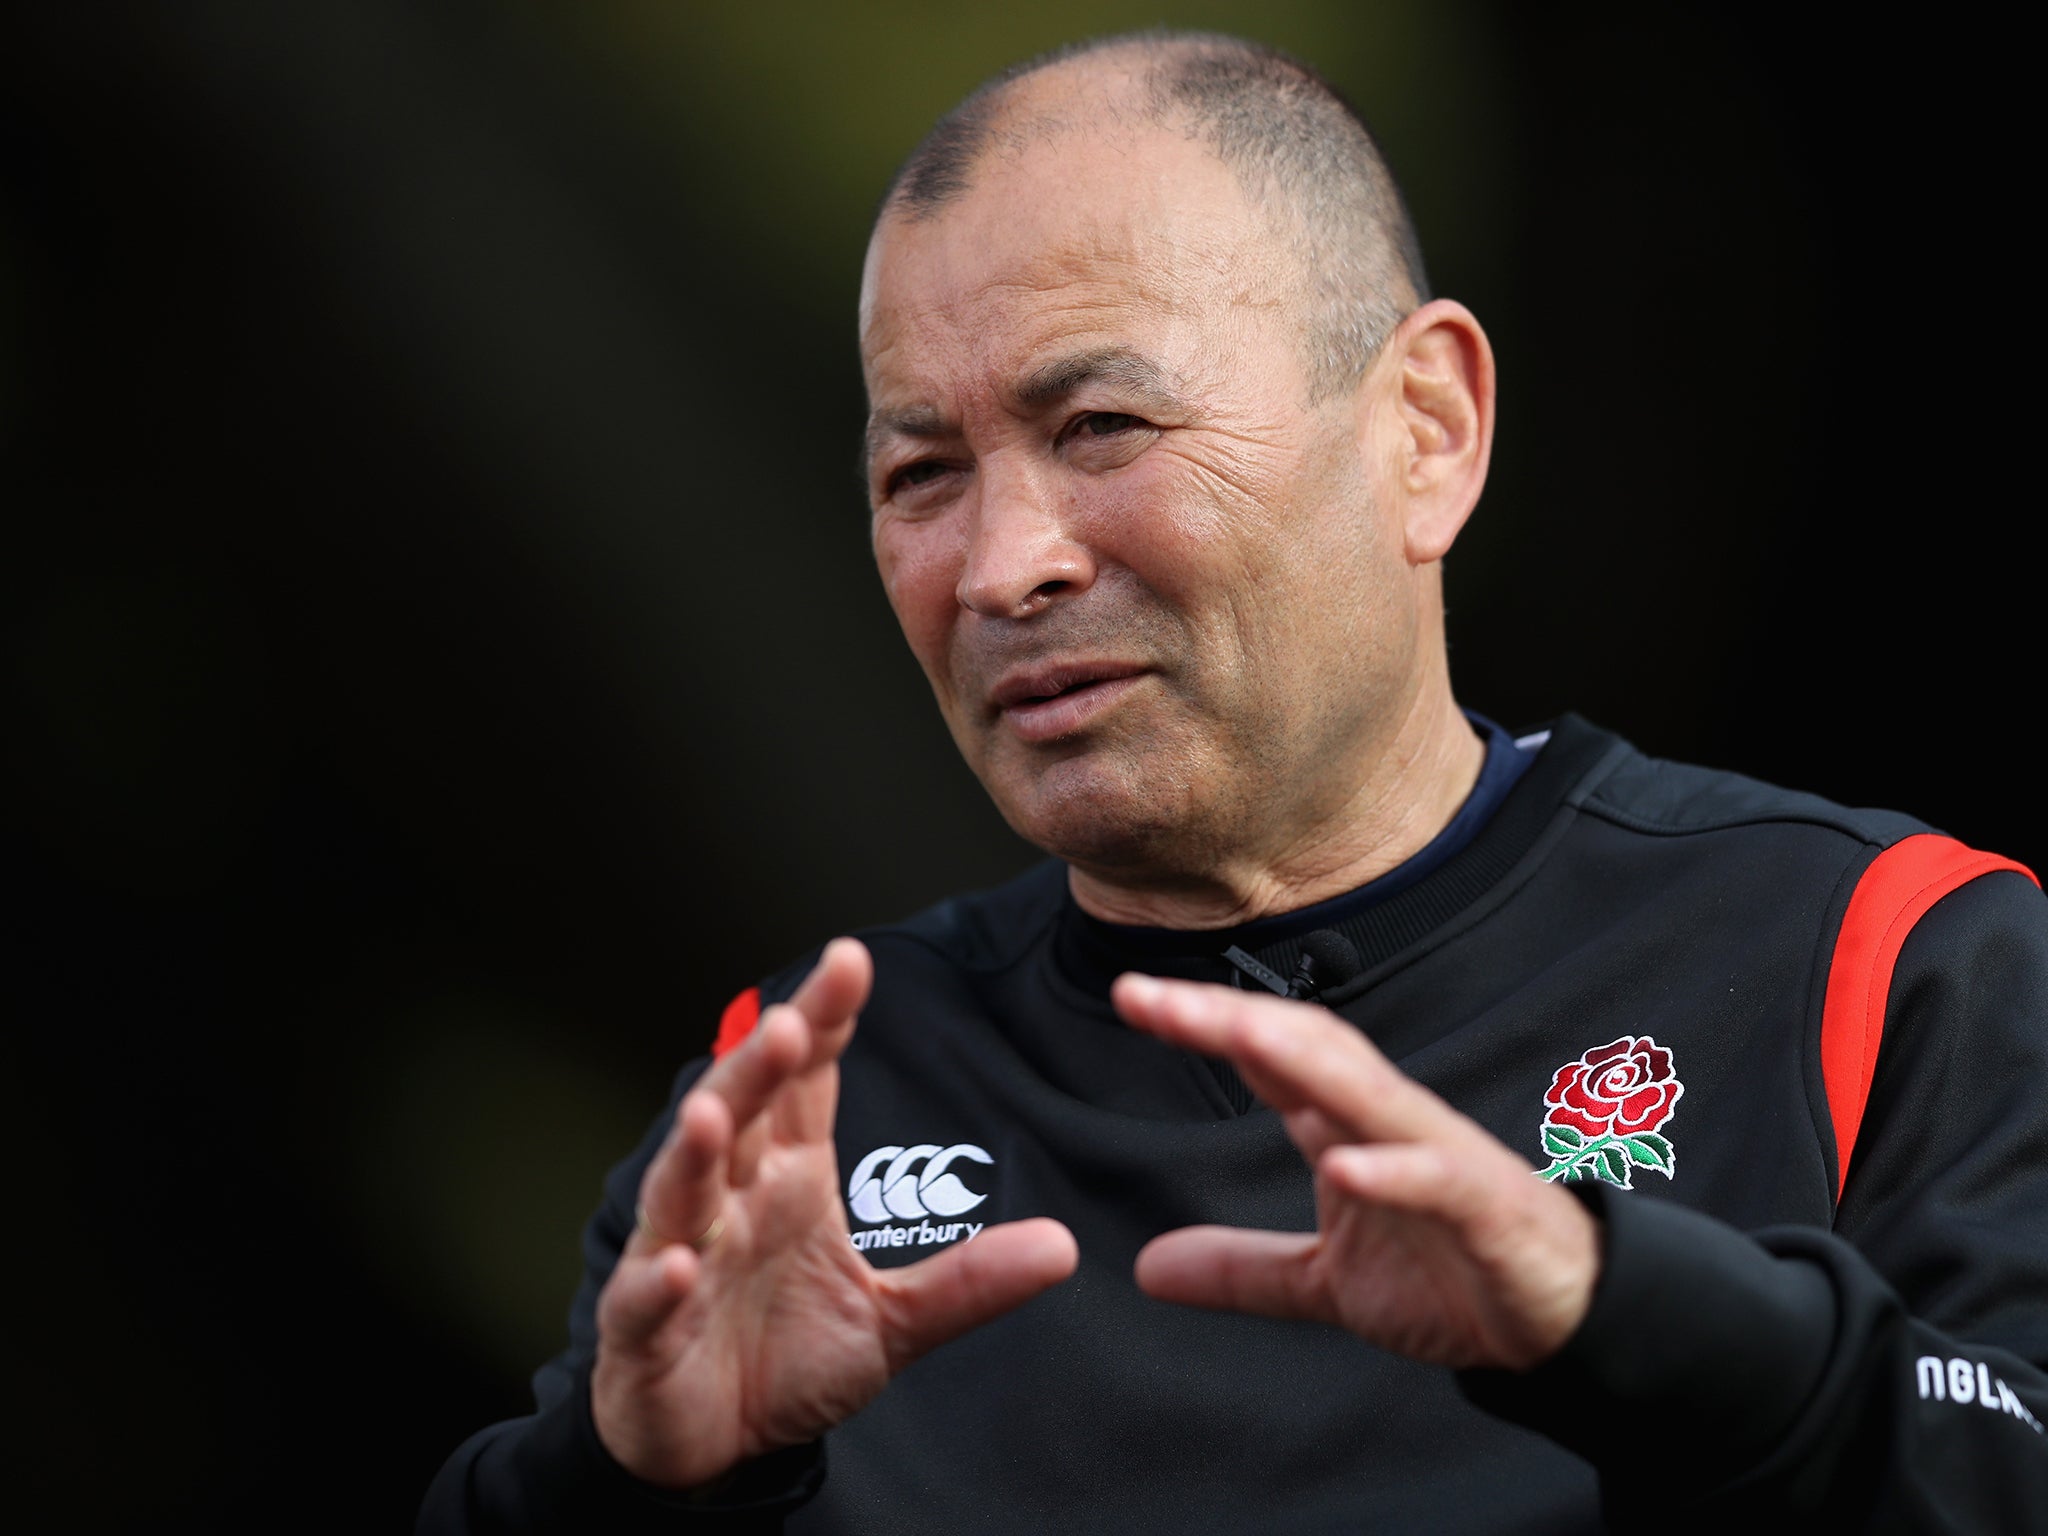 Eddie Jones has set his sights on winning the 2019 Rugby World Cup